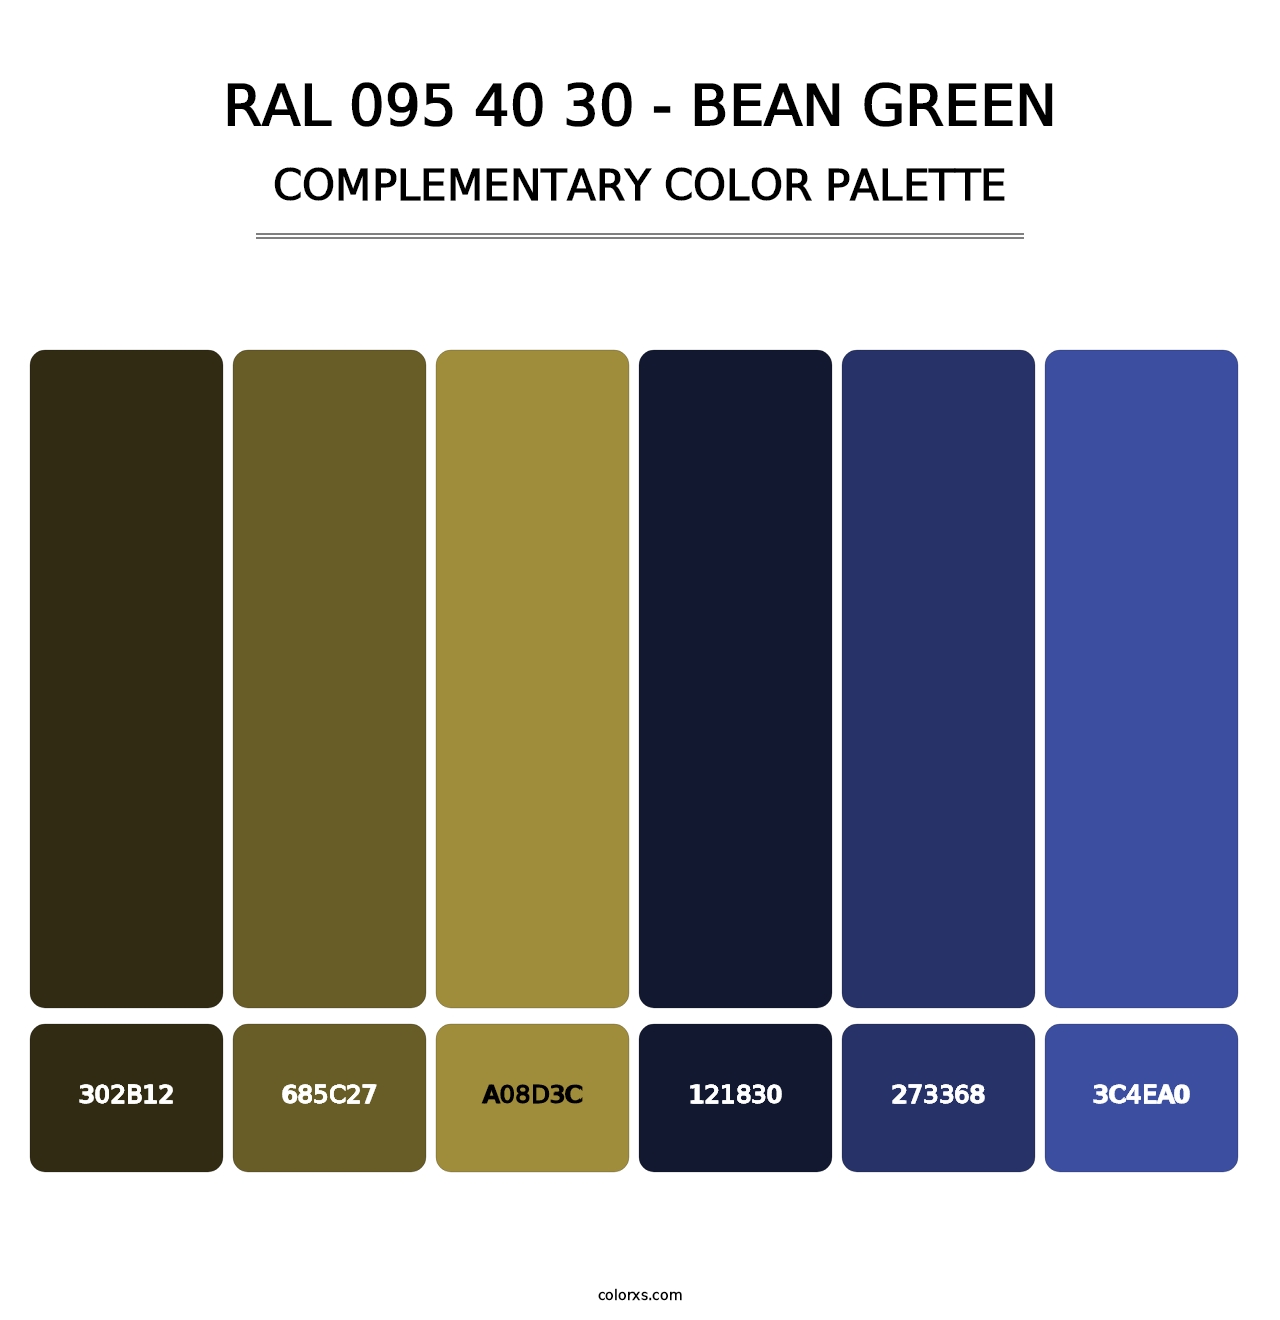 RAL 095 40 30 - Bean Green - Complementary Color Palette